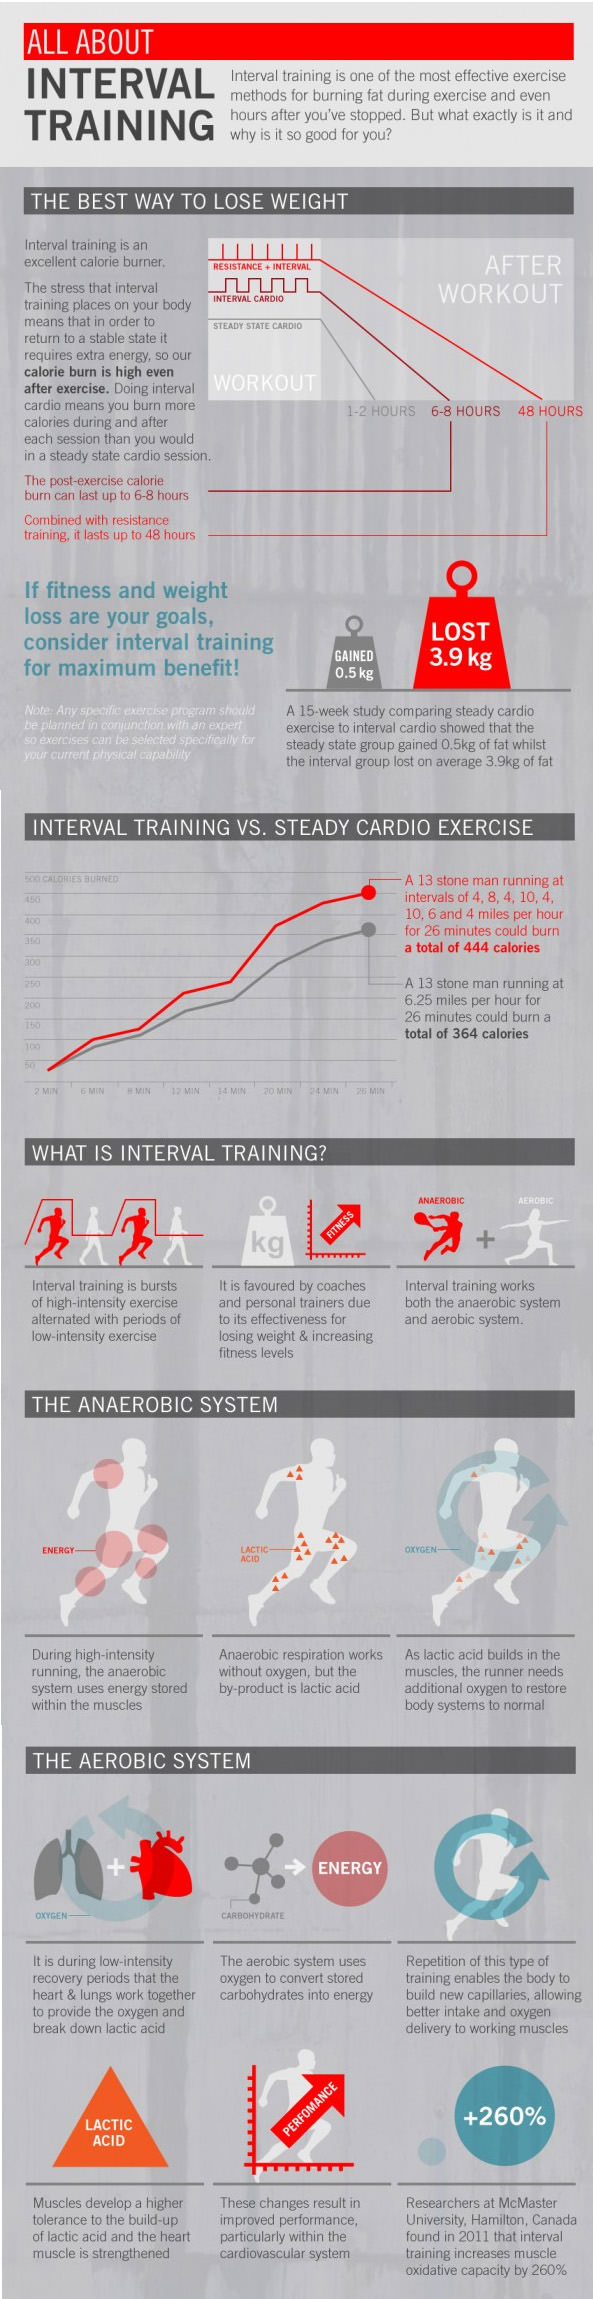 Fitness Stuff #375: All About Interval Training